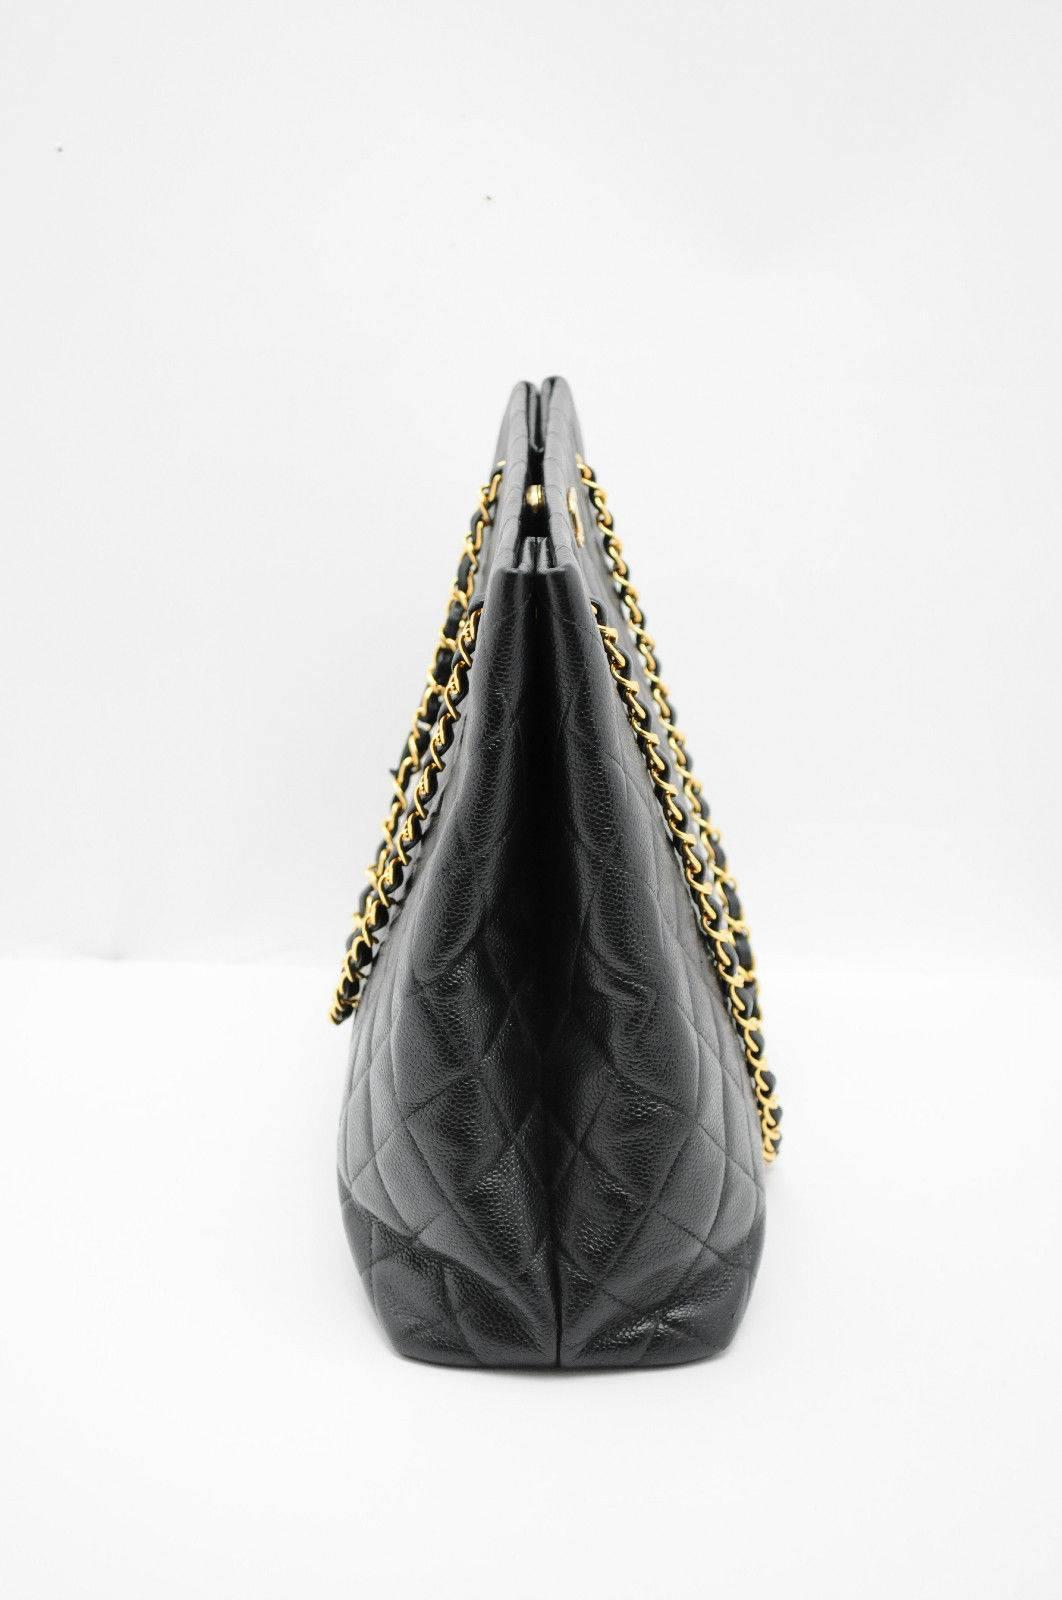 Chanel Caviar Black Quilted Leather Shopper Tote 1